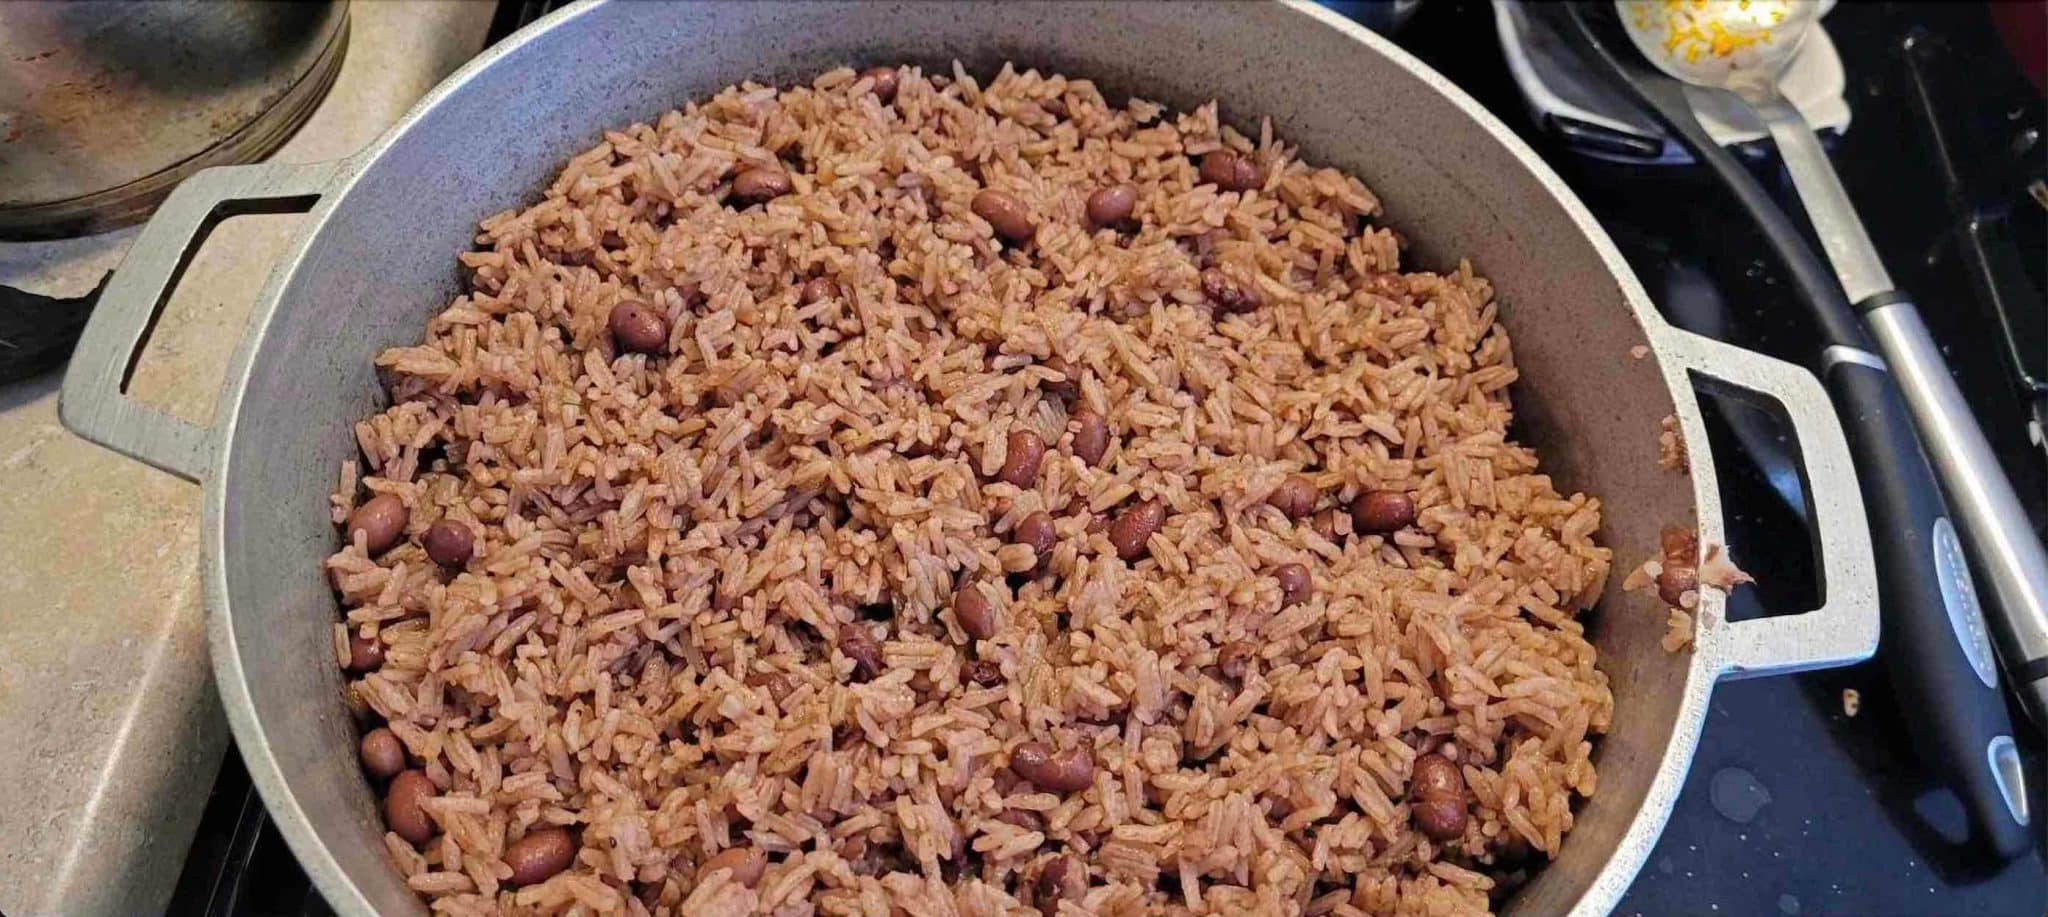 Belizean Red Beans And Rice 24 2048x917 